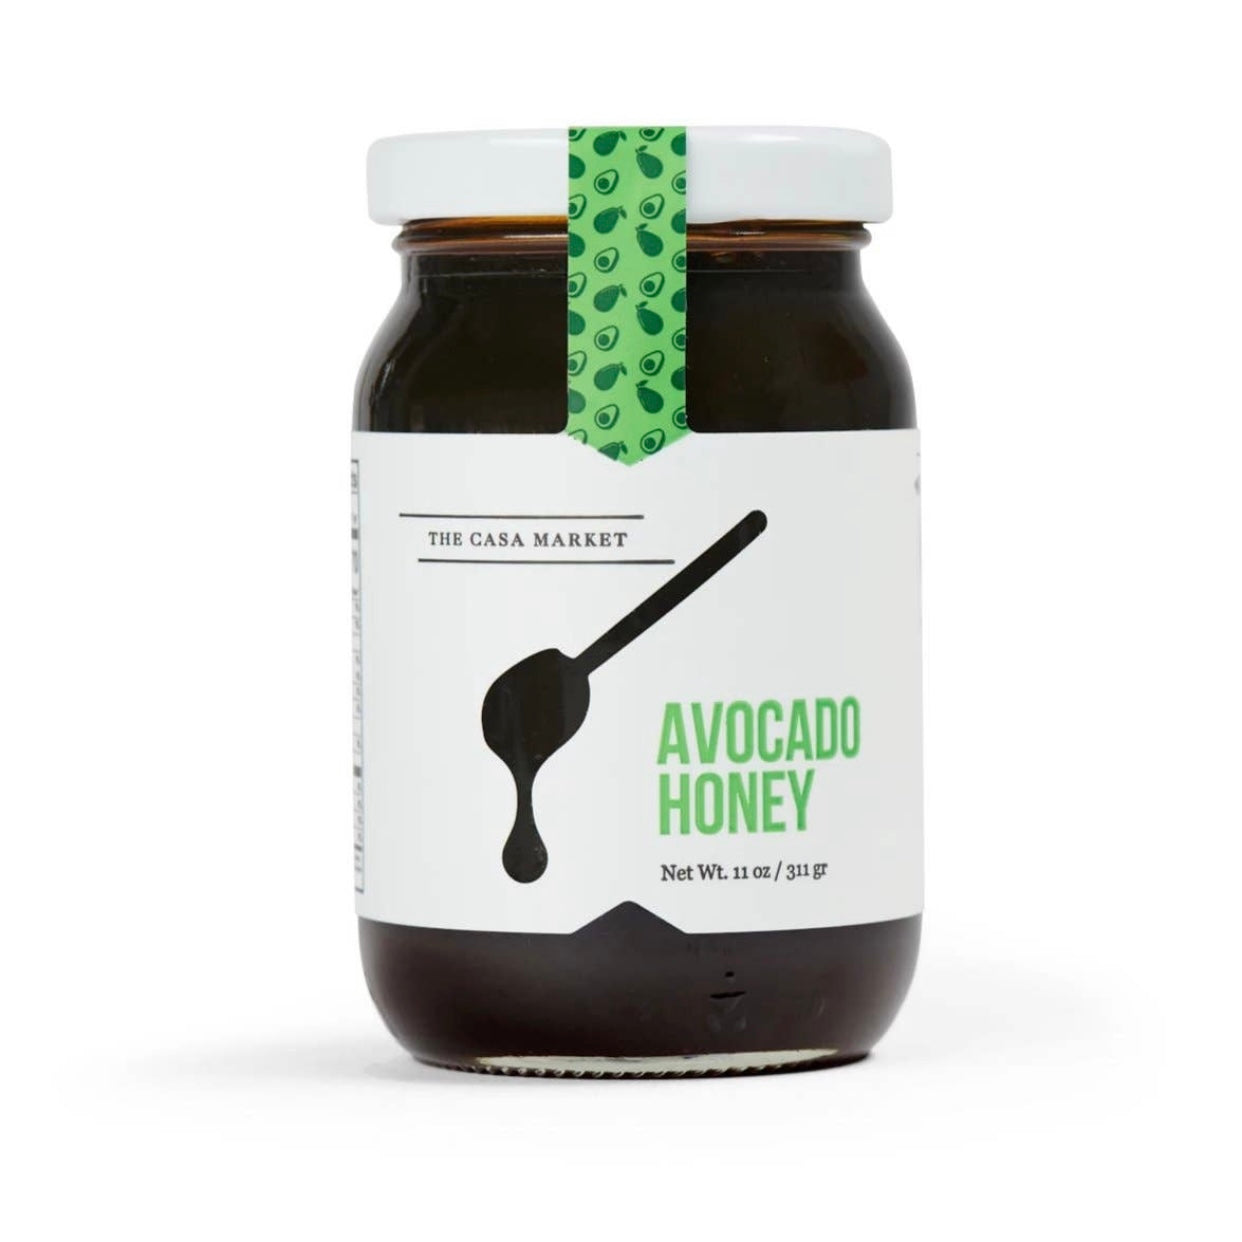 Large Avocado Honey in an 11 ounce jar with a white branded label that features a honey dipper.